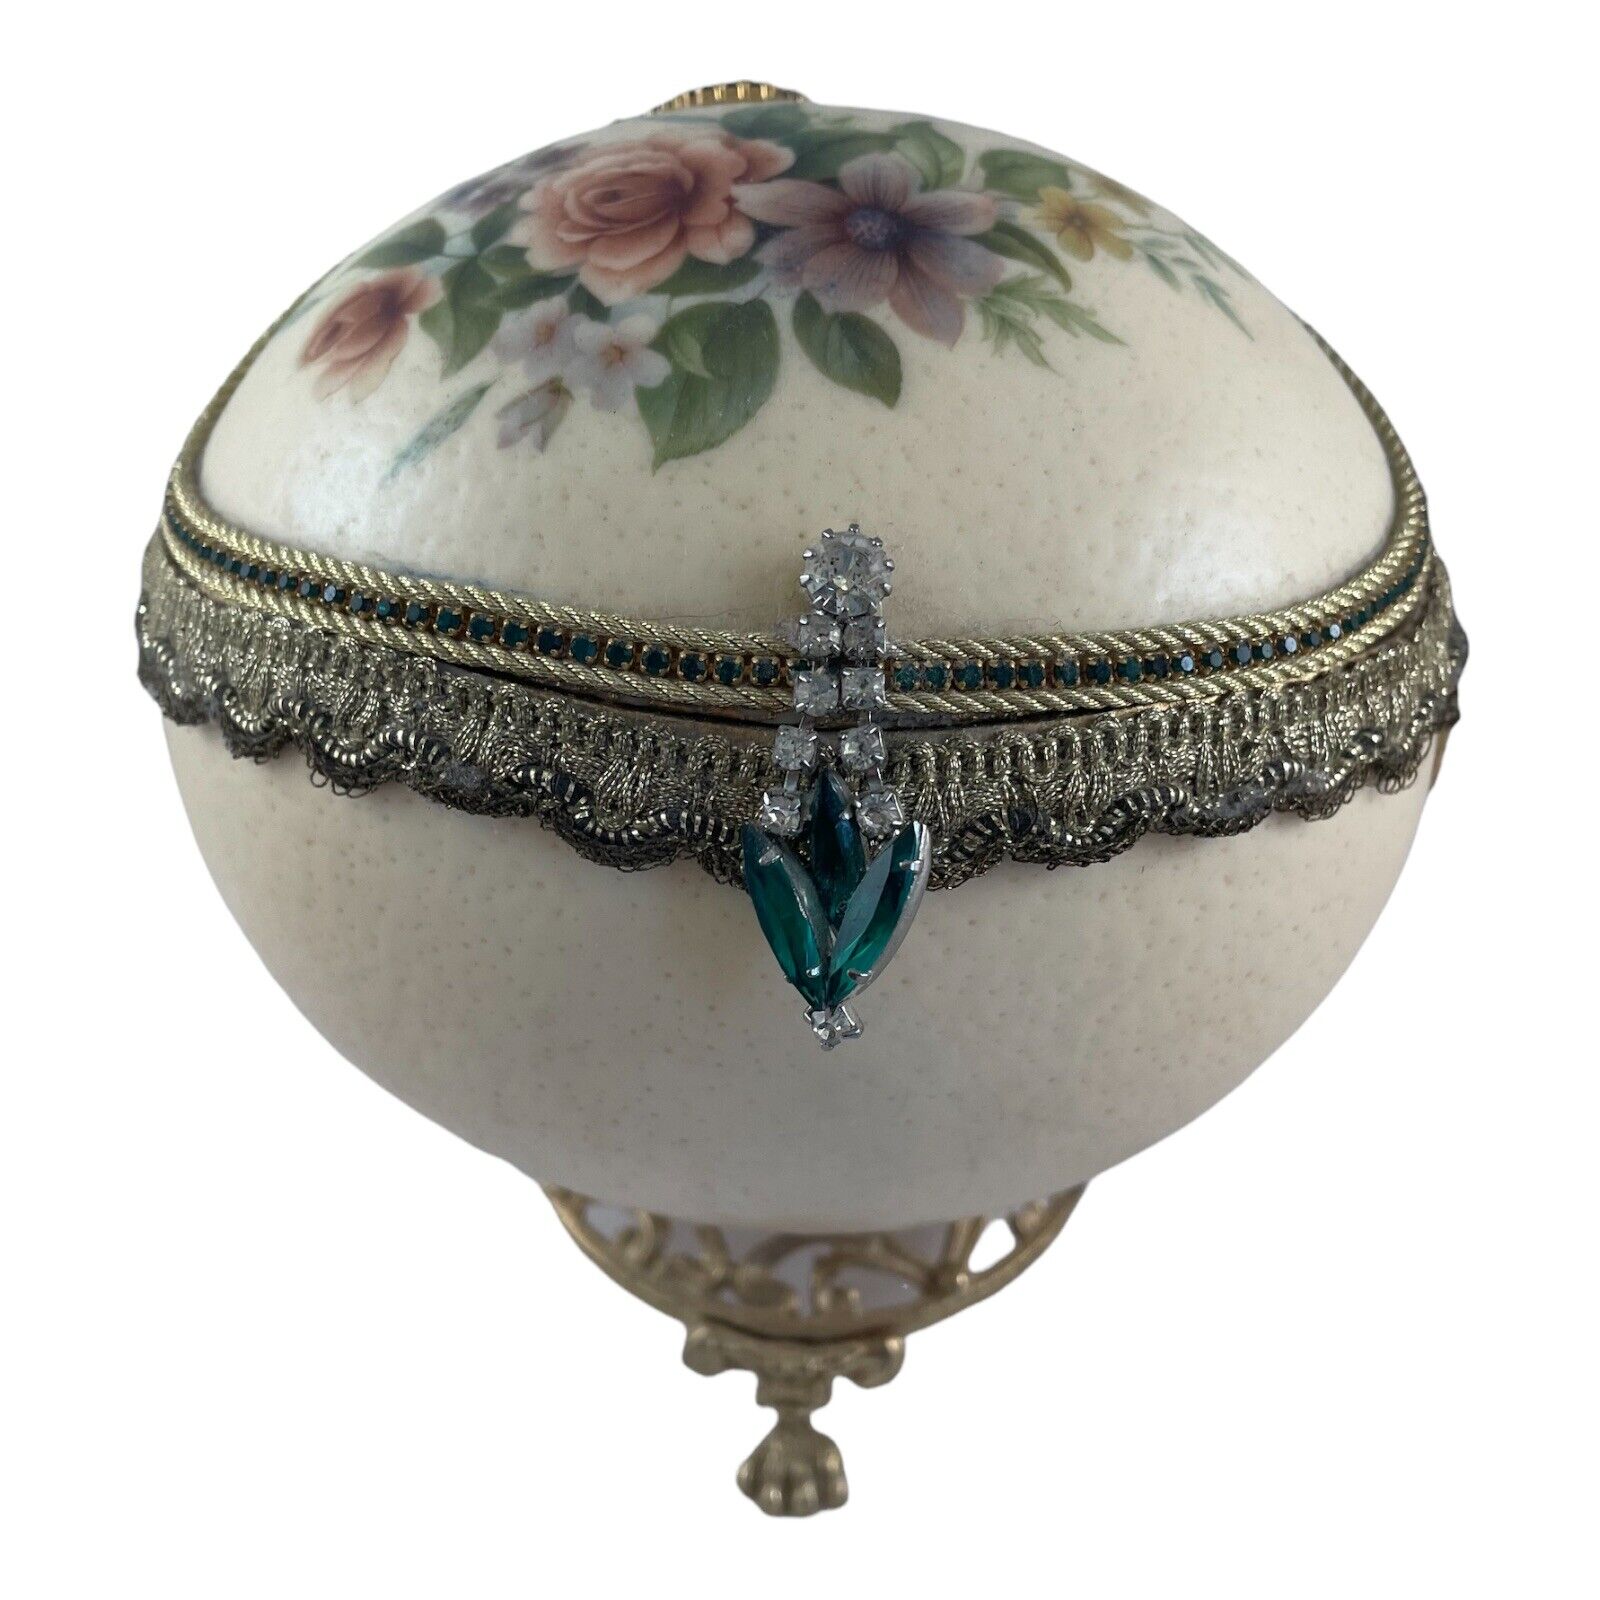 VTG Ostrich Egg Bride Jewelry Music Box  Hand Painted Green Jewels Brass Ped.